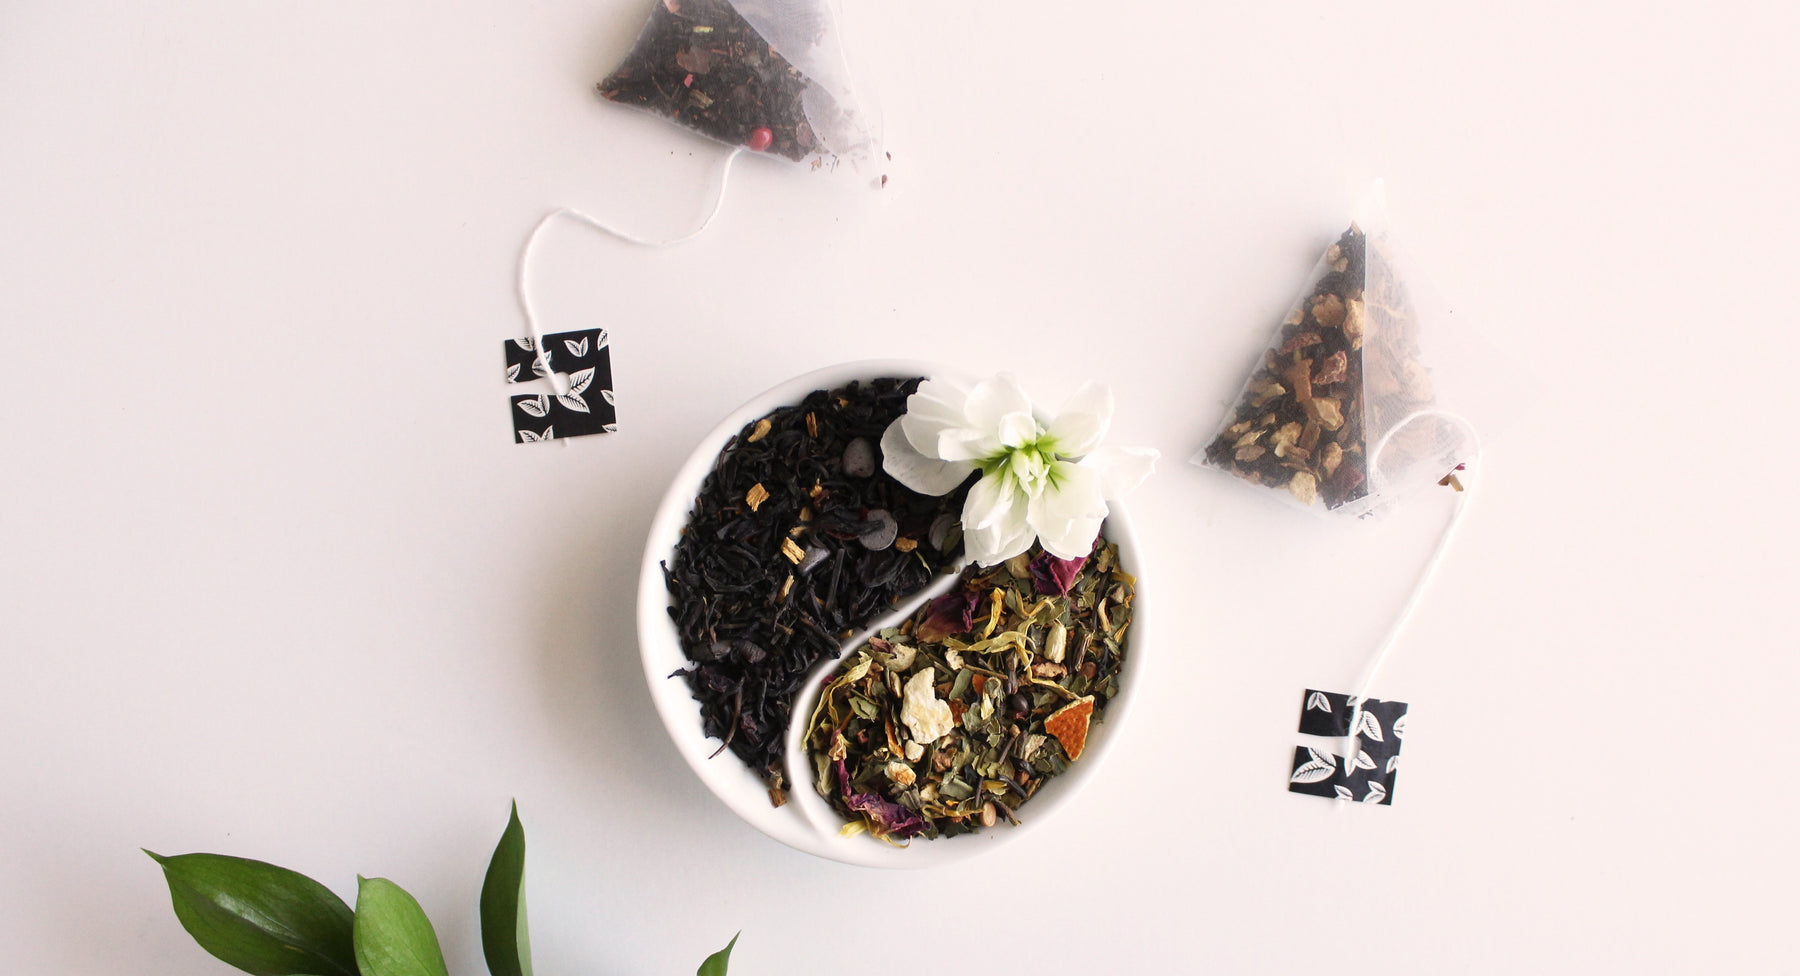 LOOSE LEAF TEA OR TEA BAGS: IS THERE A REAL DIFFERENCE?